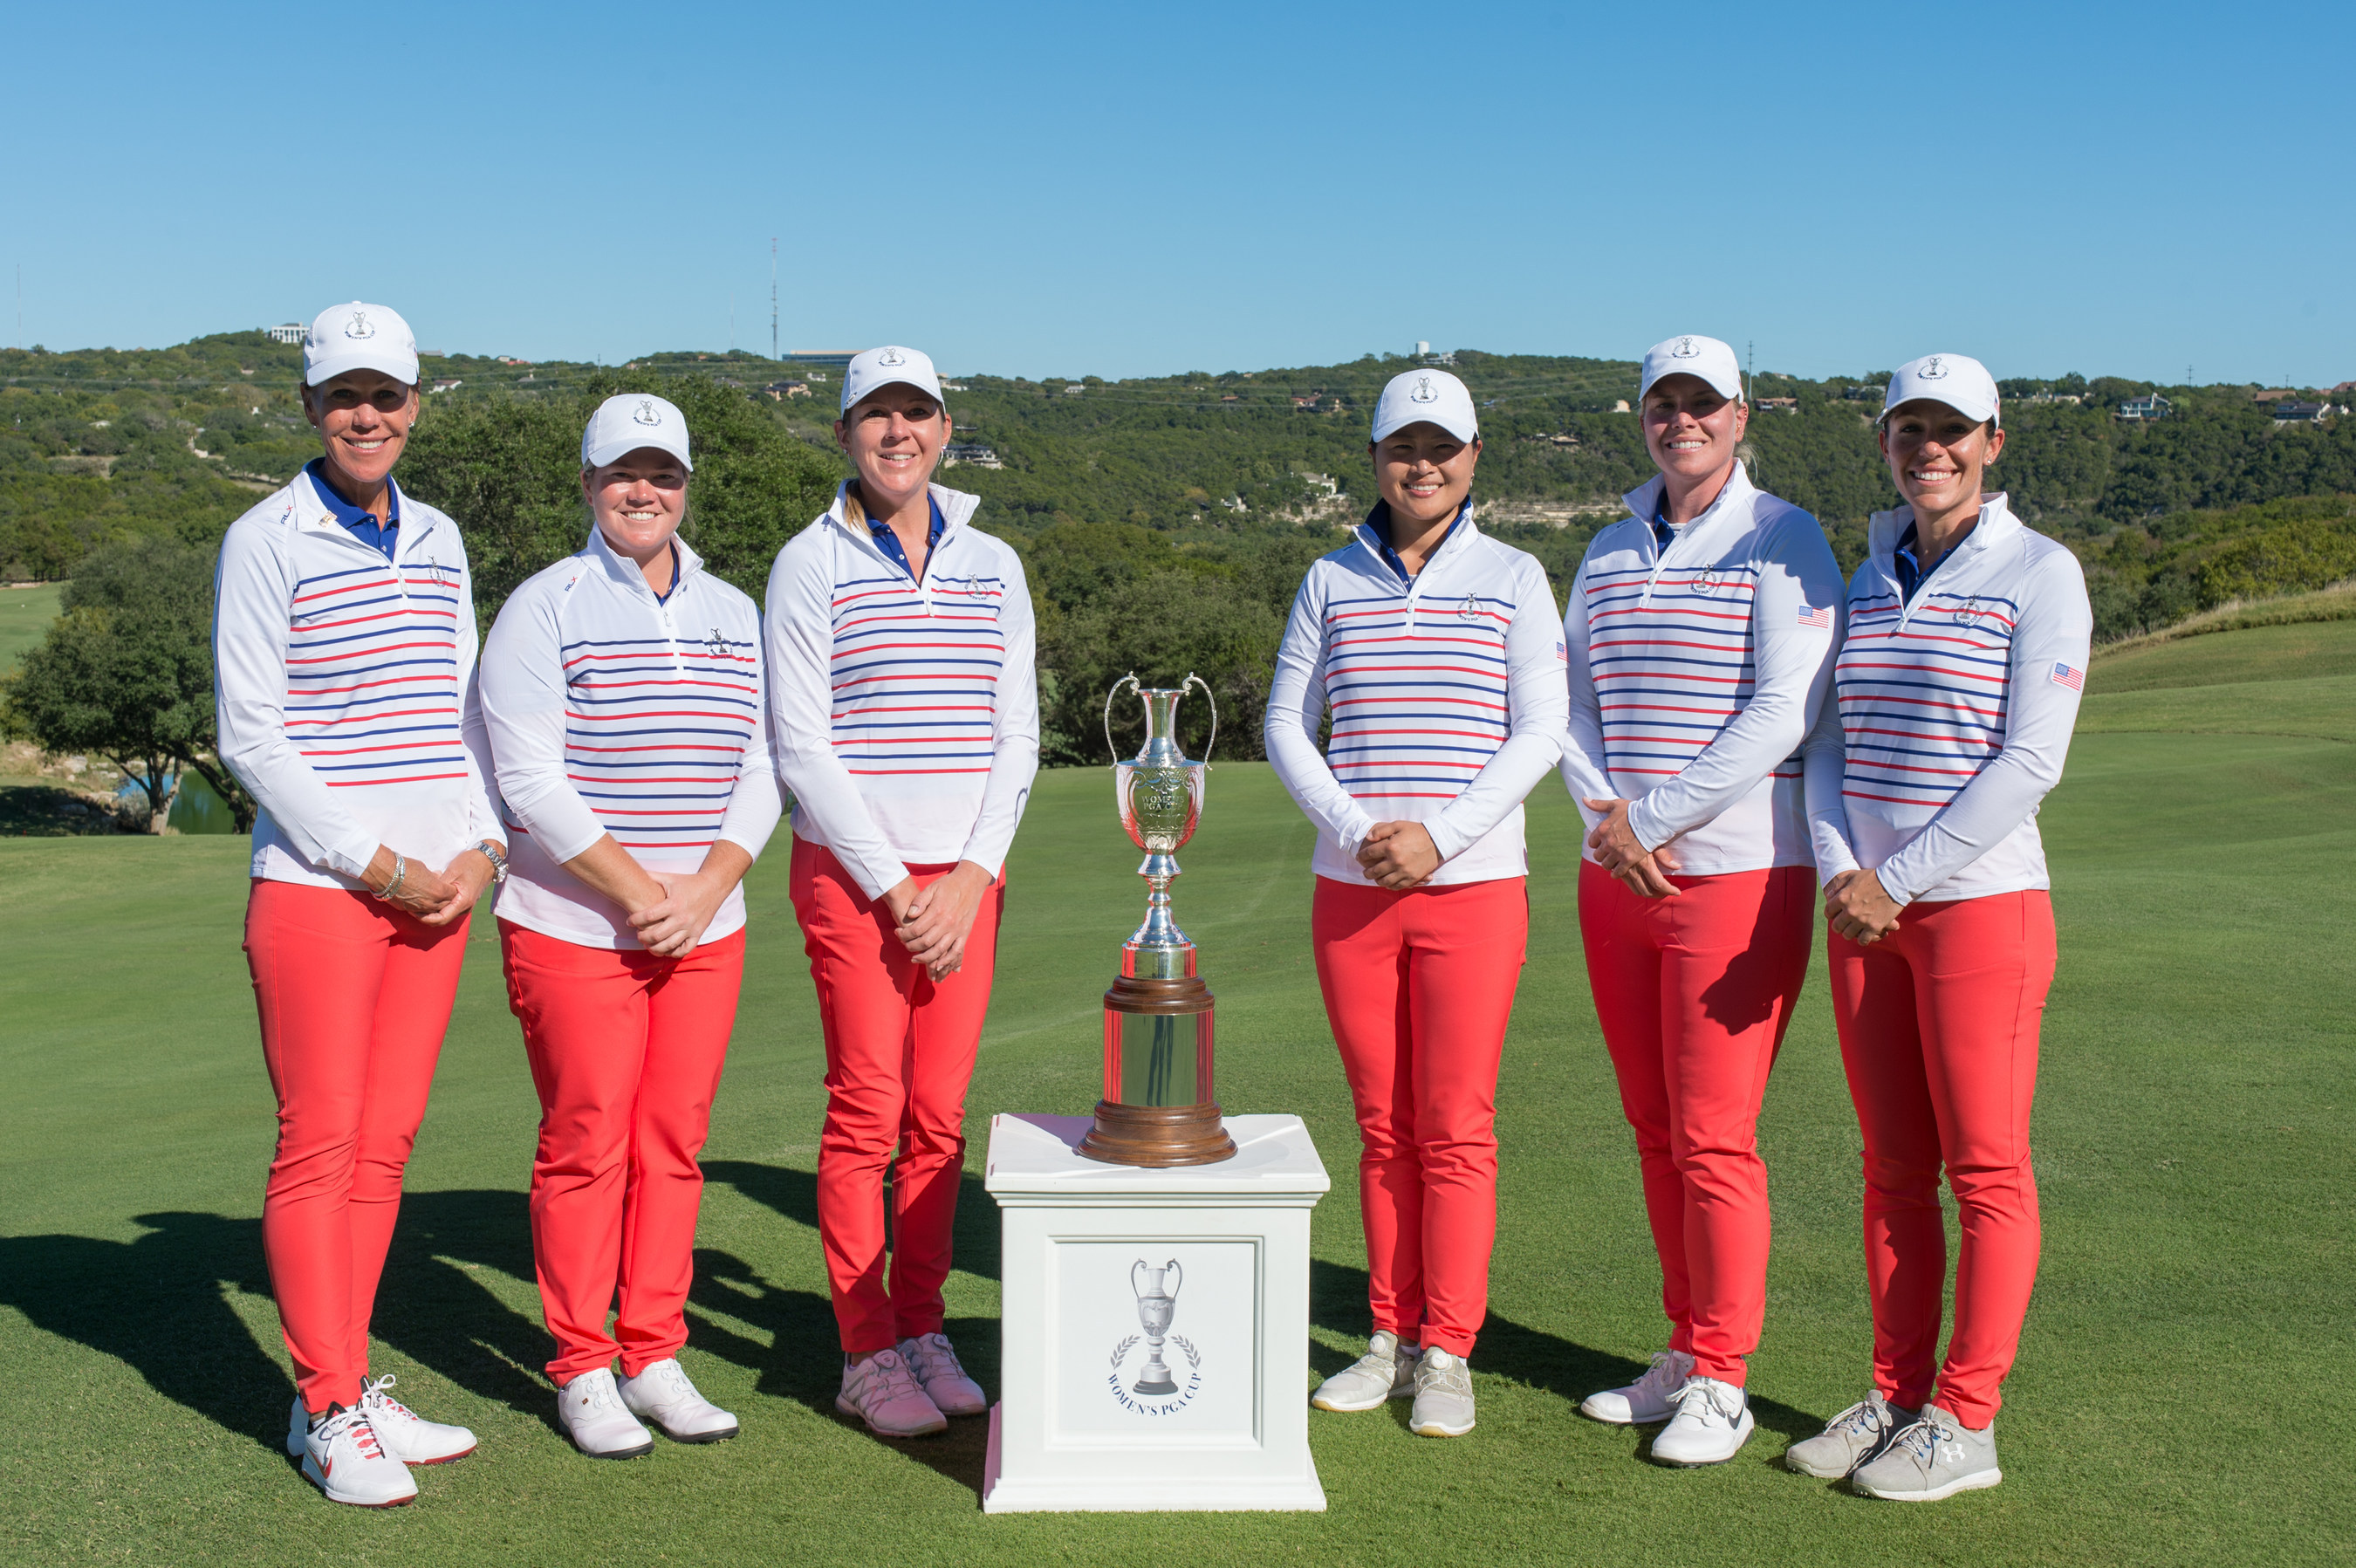 United States digs deep to hold off Canada to Capture the Inaugural Women's PGA Cup